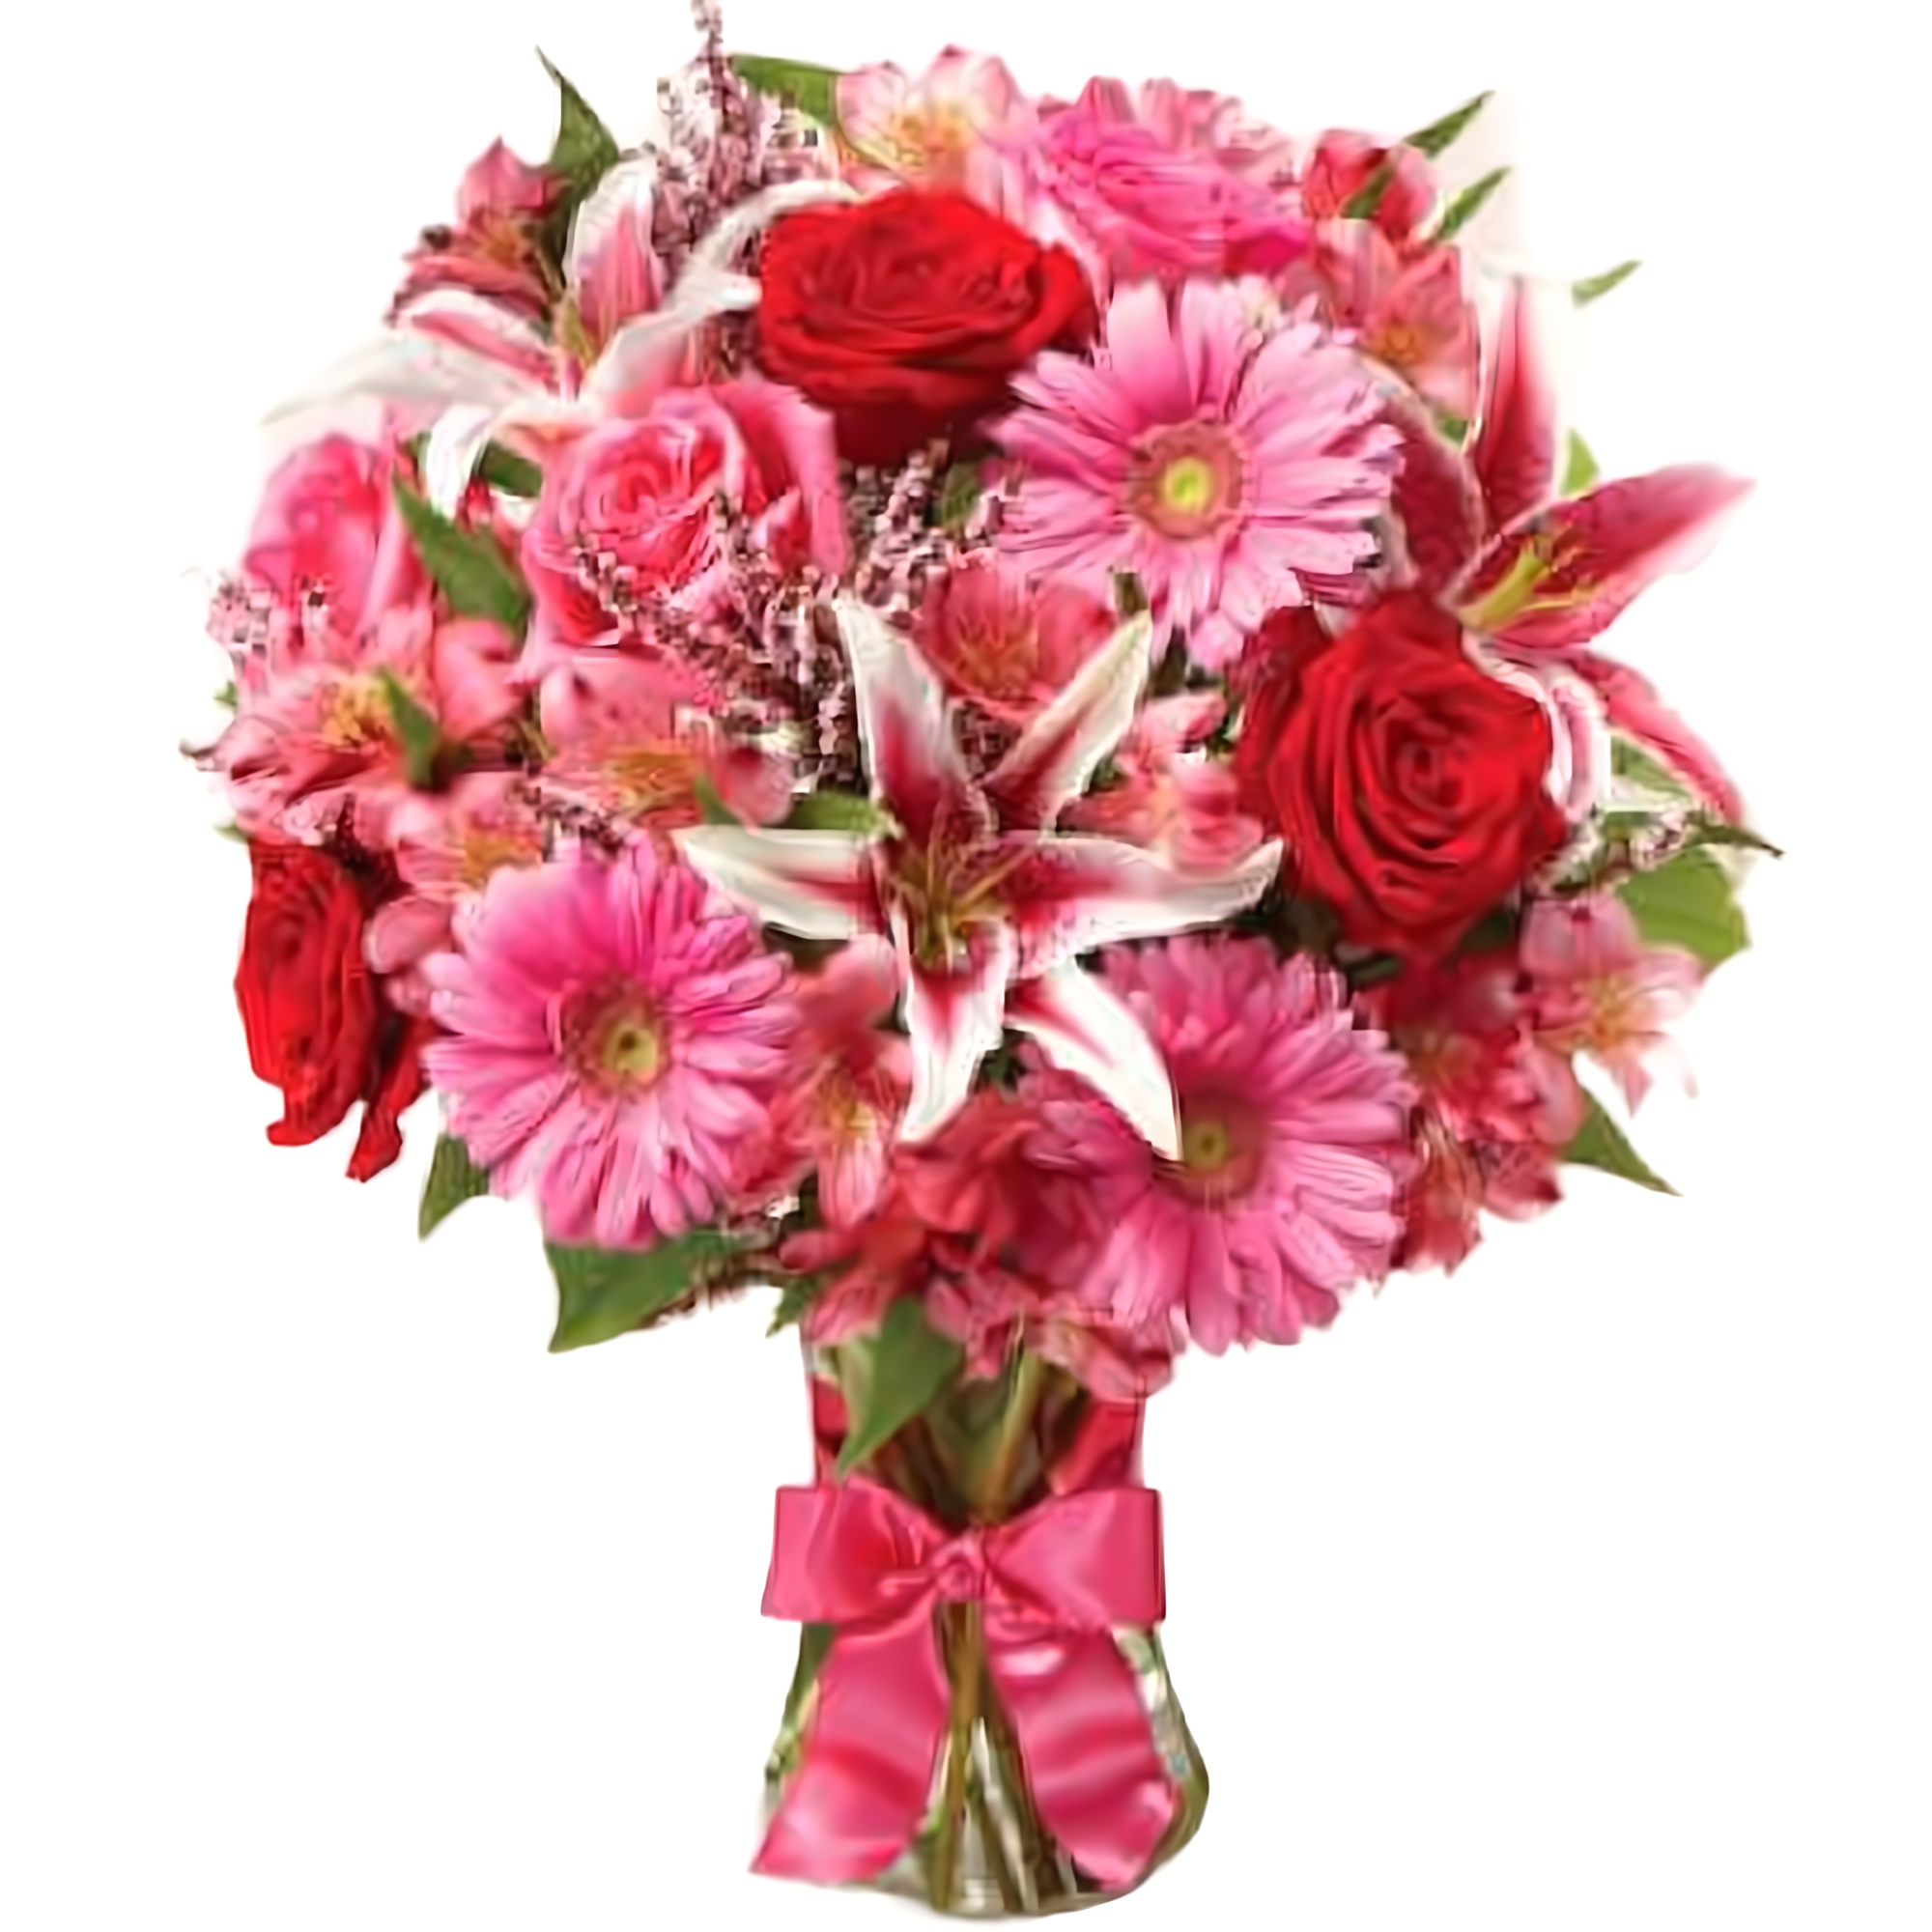 Manhattan Flower Delivery - Colors Of Love - Occasions > Anniversary